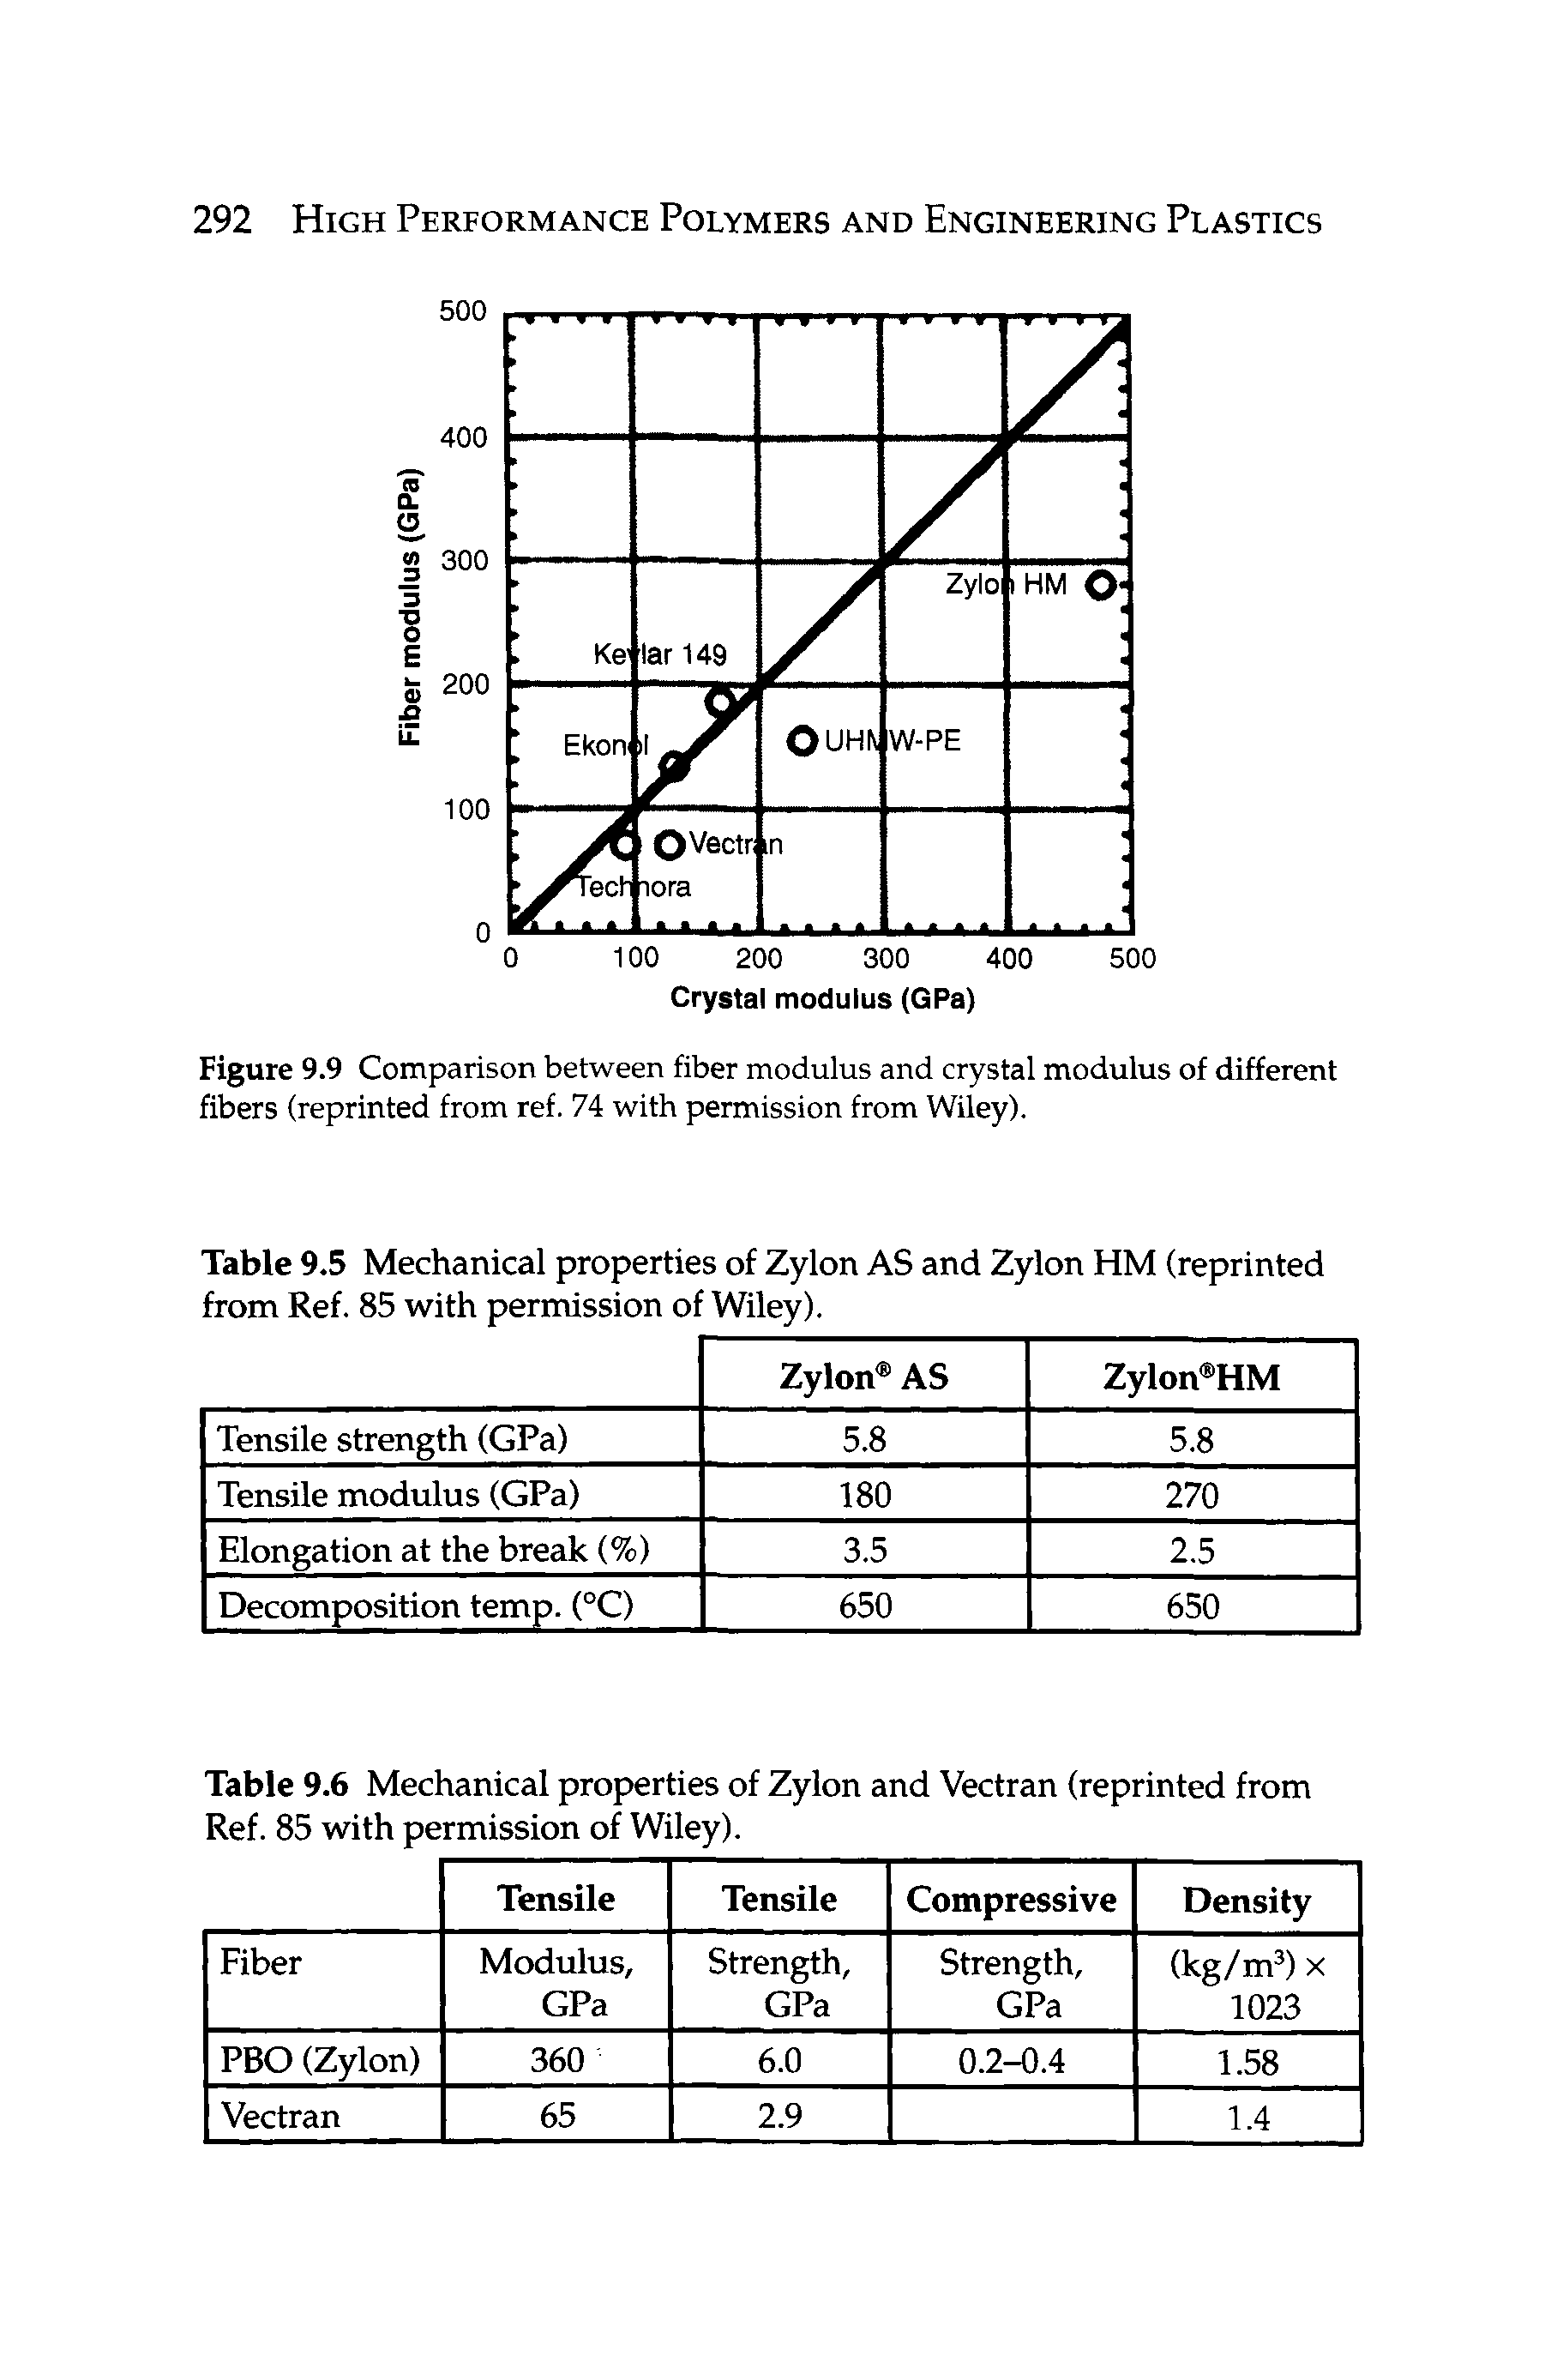 Figure 9.9 Comparison between fiber modulus and crystal modulus of different fibers (reprinted from ref. 74 with permission from Wiley).